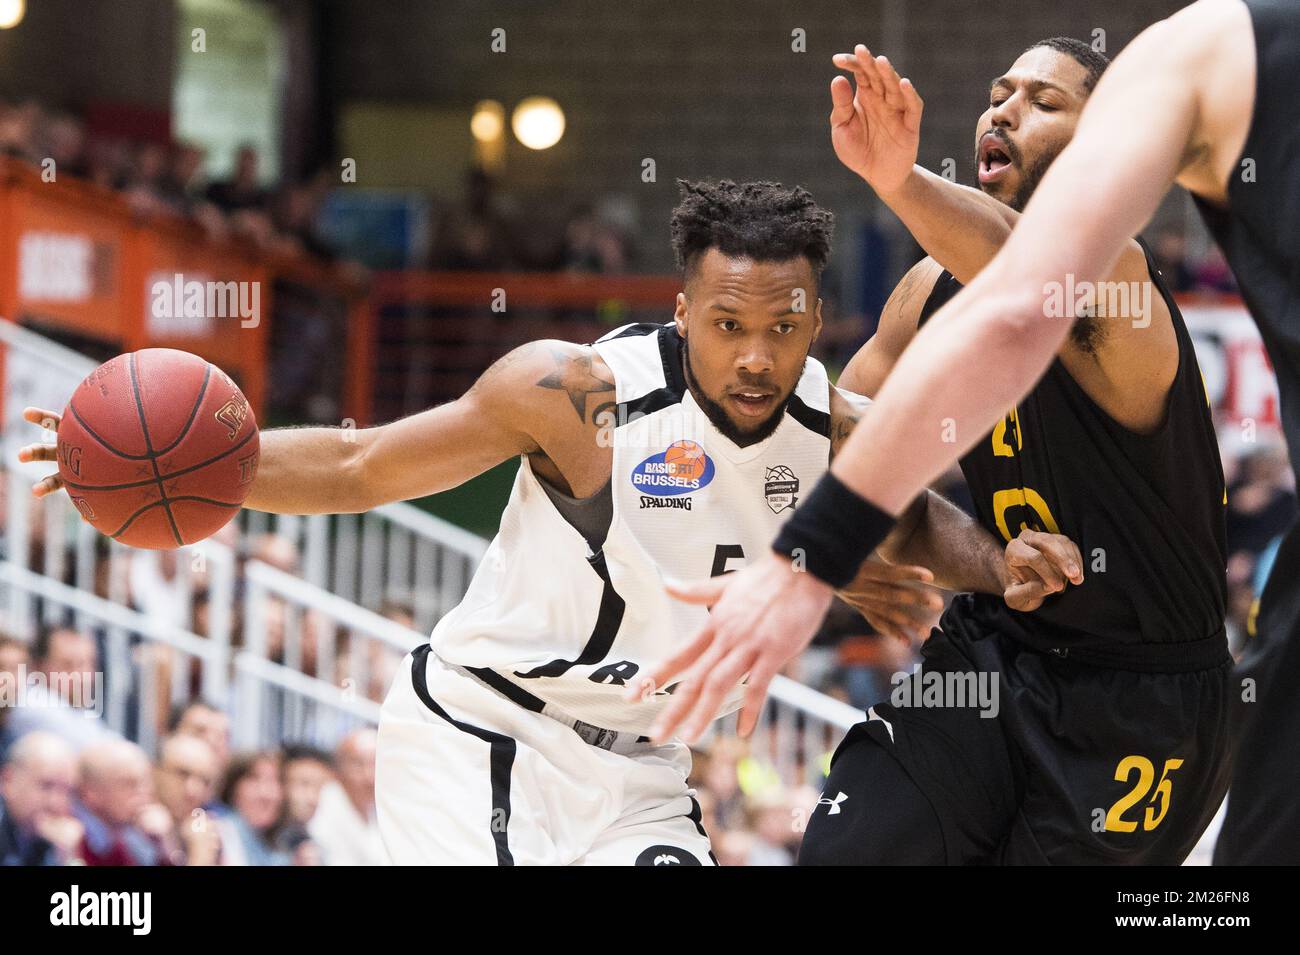 Brussels' Chris Dowe and Oostende's DJ Newbill fight for the ball during  the basketball game between Brussels and Oostende, the 30th match day of  the EuroMillions League basket competition, on Sunday 16